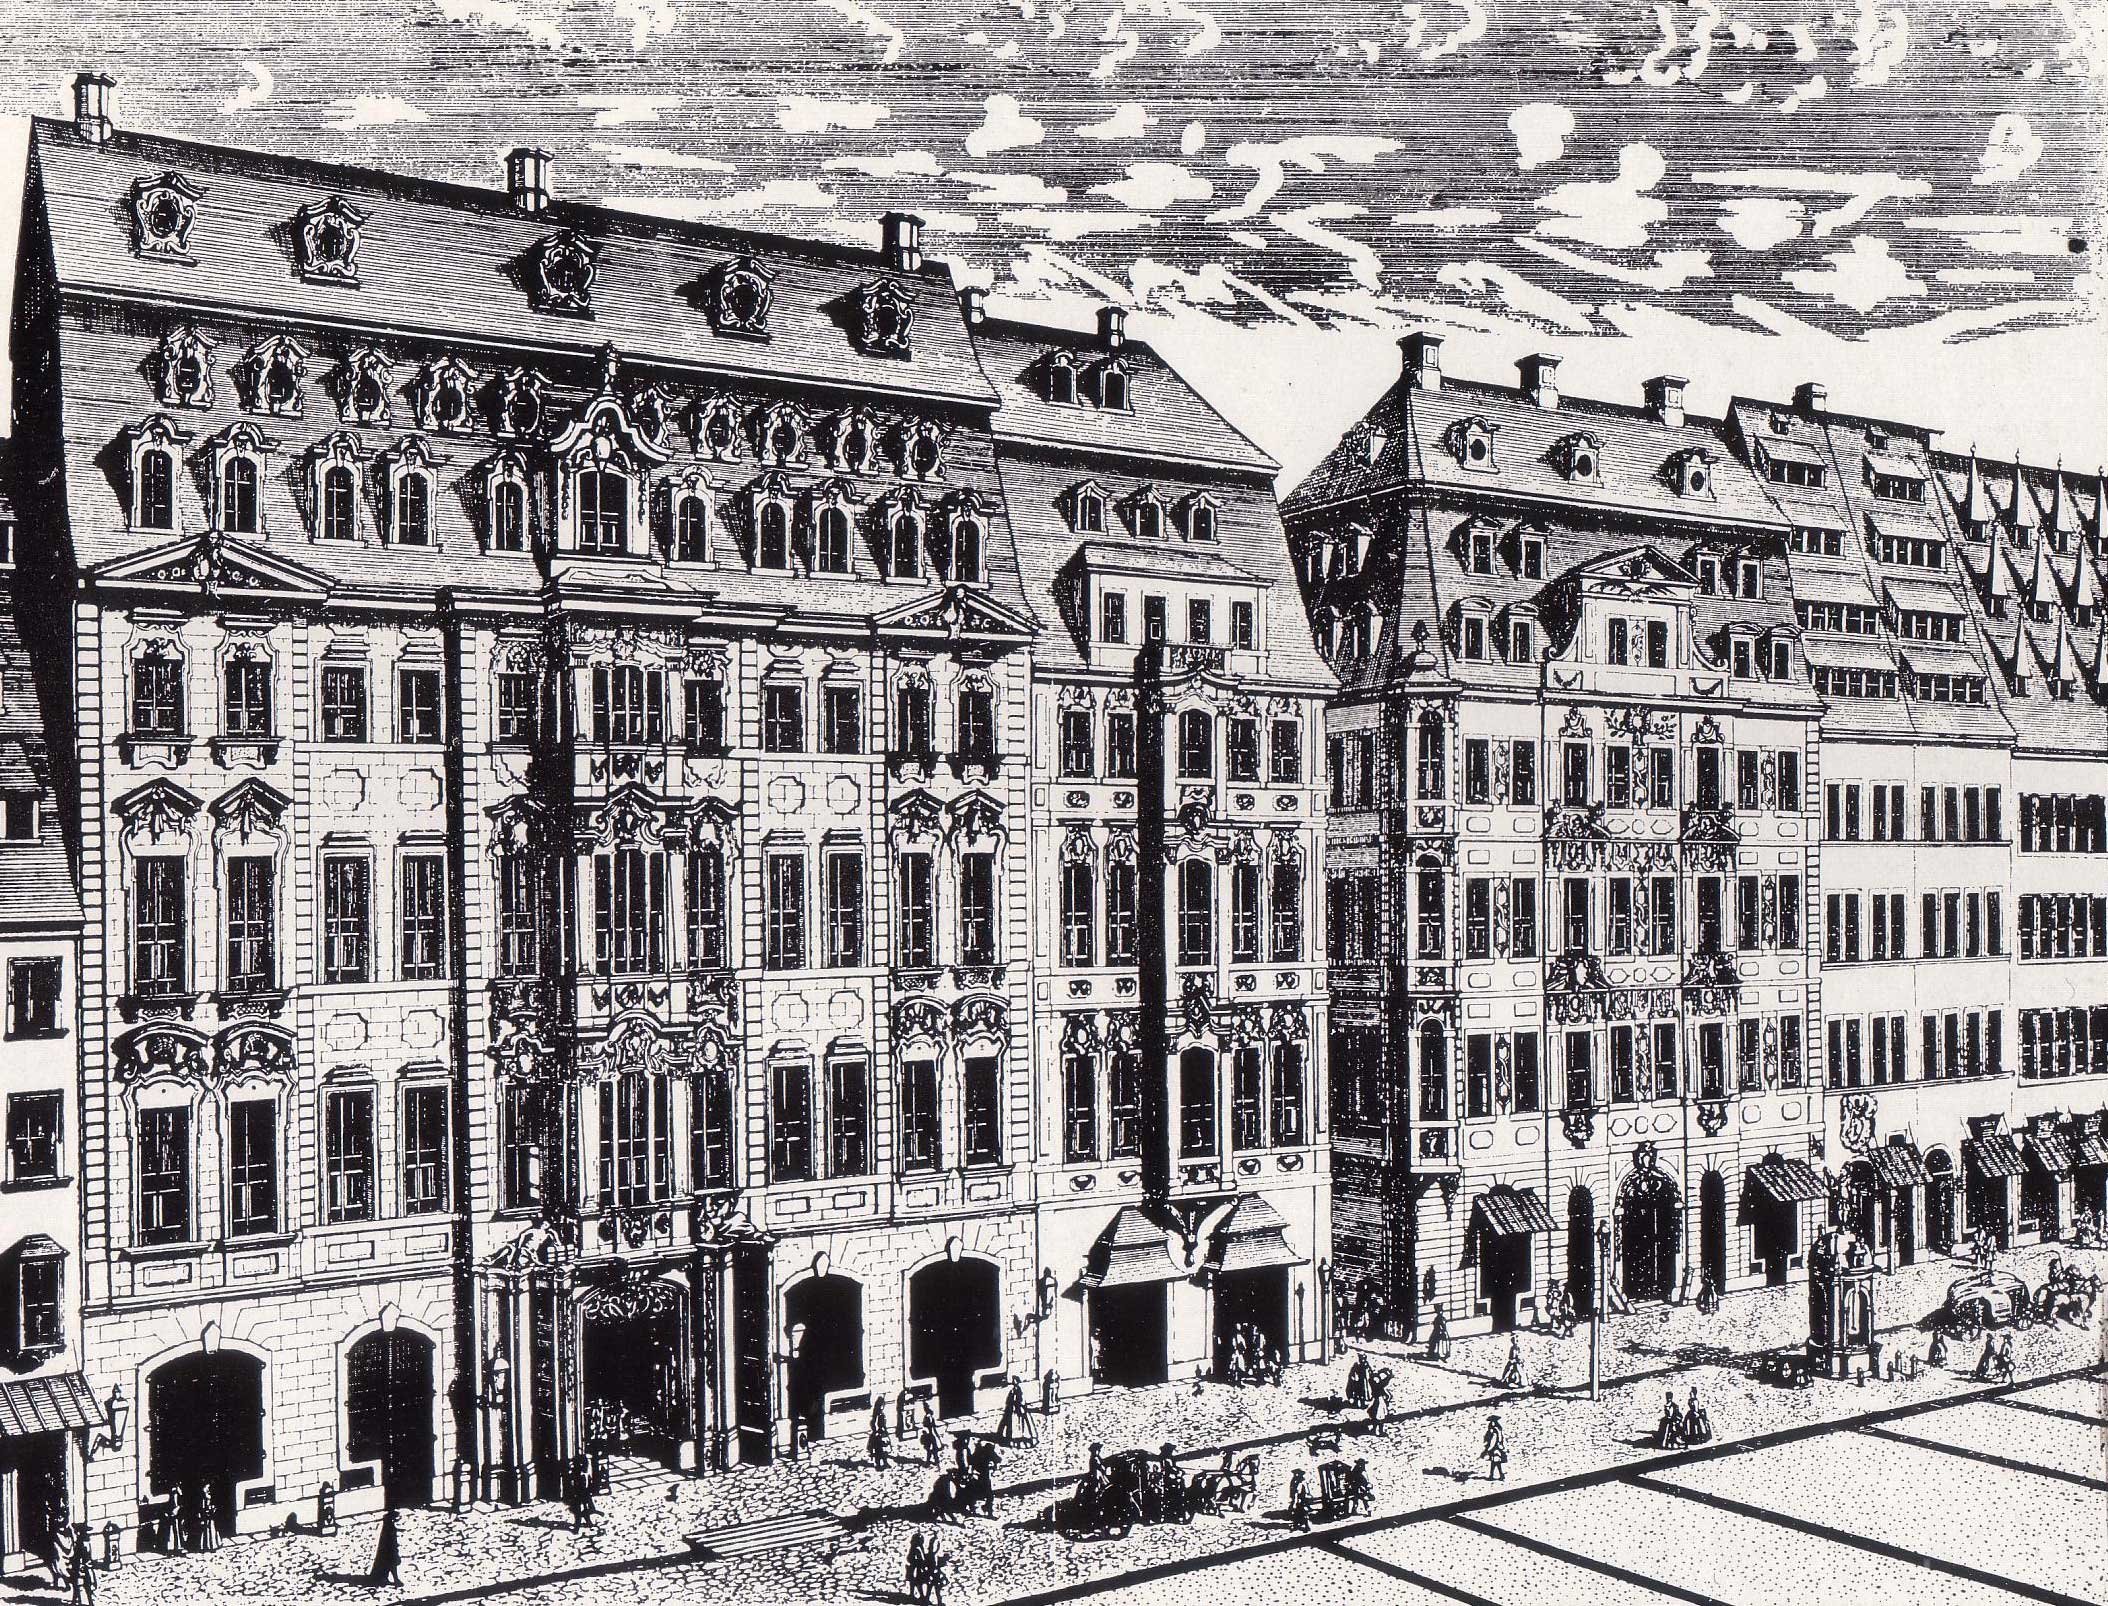 Katharinenstraße 16, 14 and 12, engraving by Johann George Schreiber in 1720. Number 14, the house in the middle, is Café Zimmermann, home of the musical ensemble Collegium Musicum, which Bach led from 1729 to 1741.